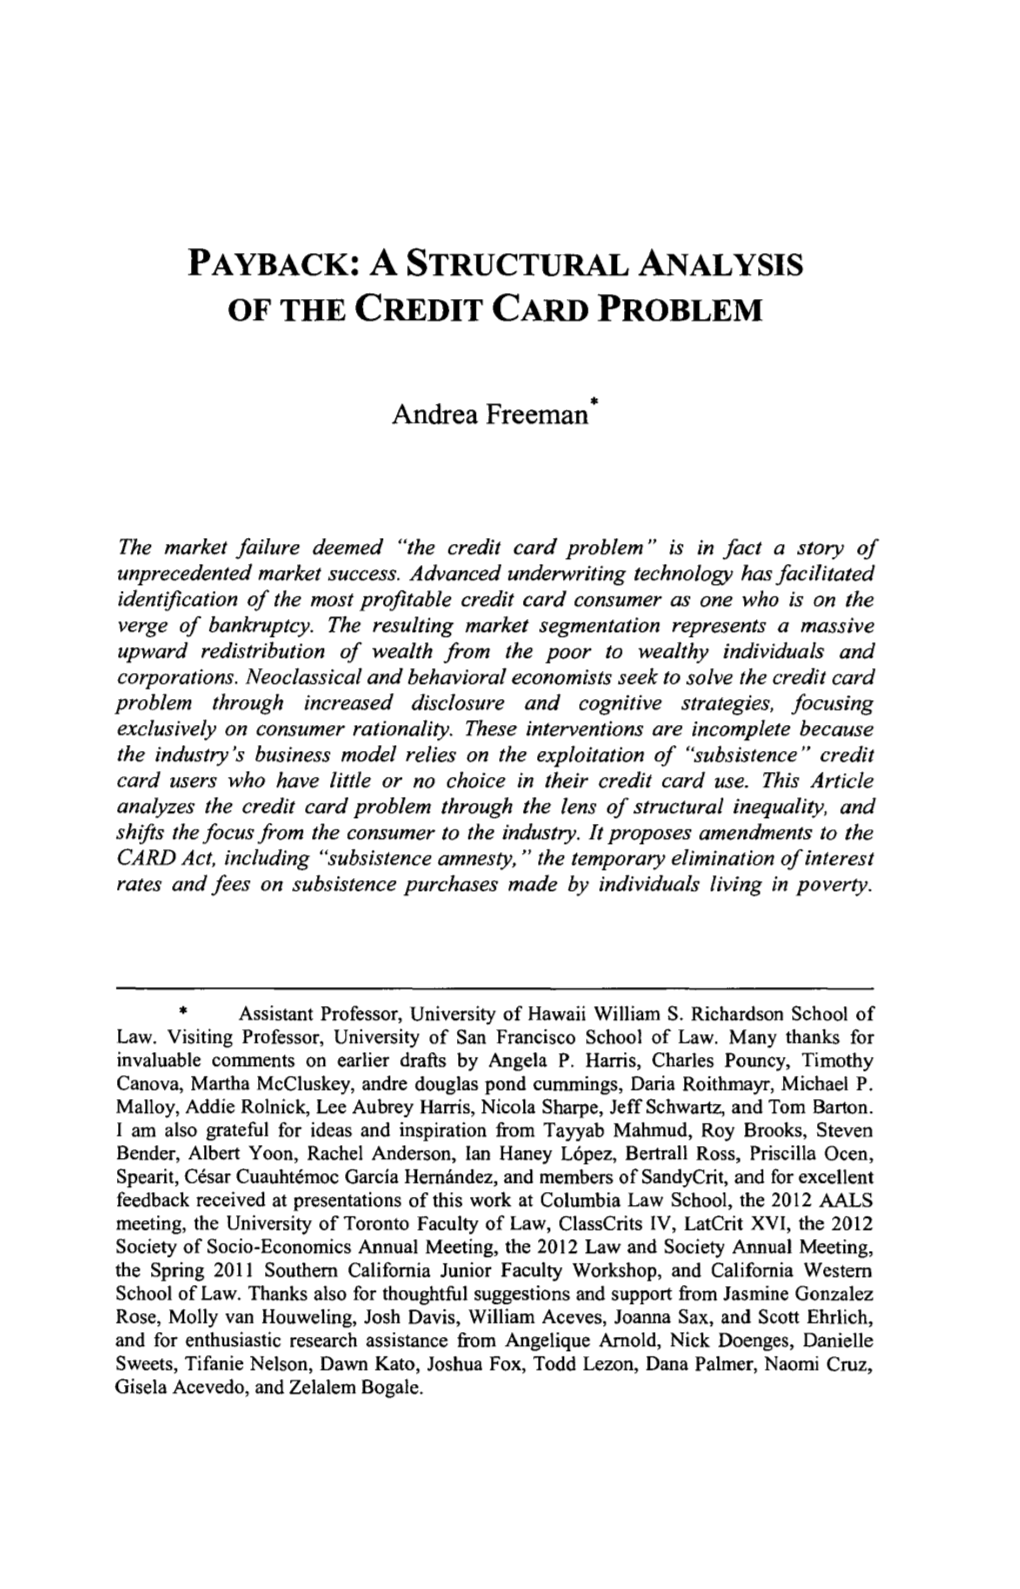 Payback: a Structural Analysis of the Credit Card Problem